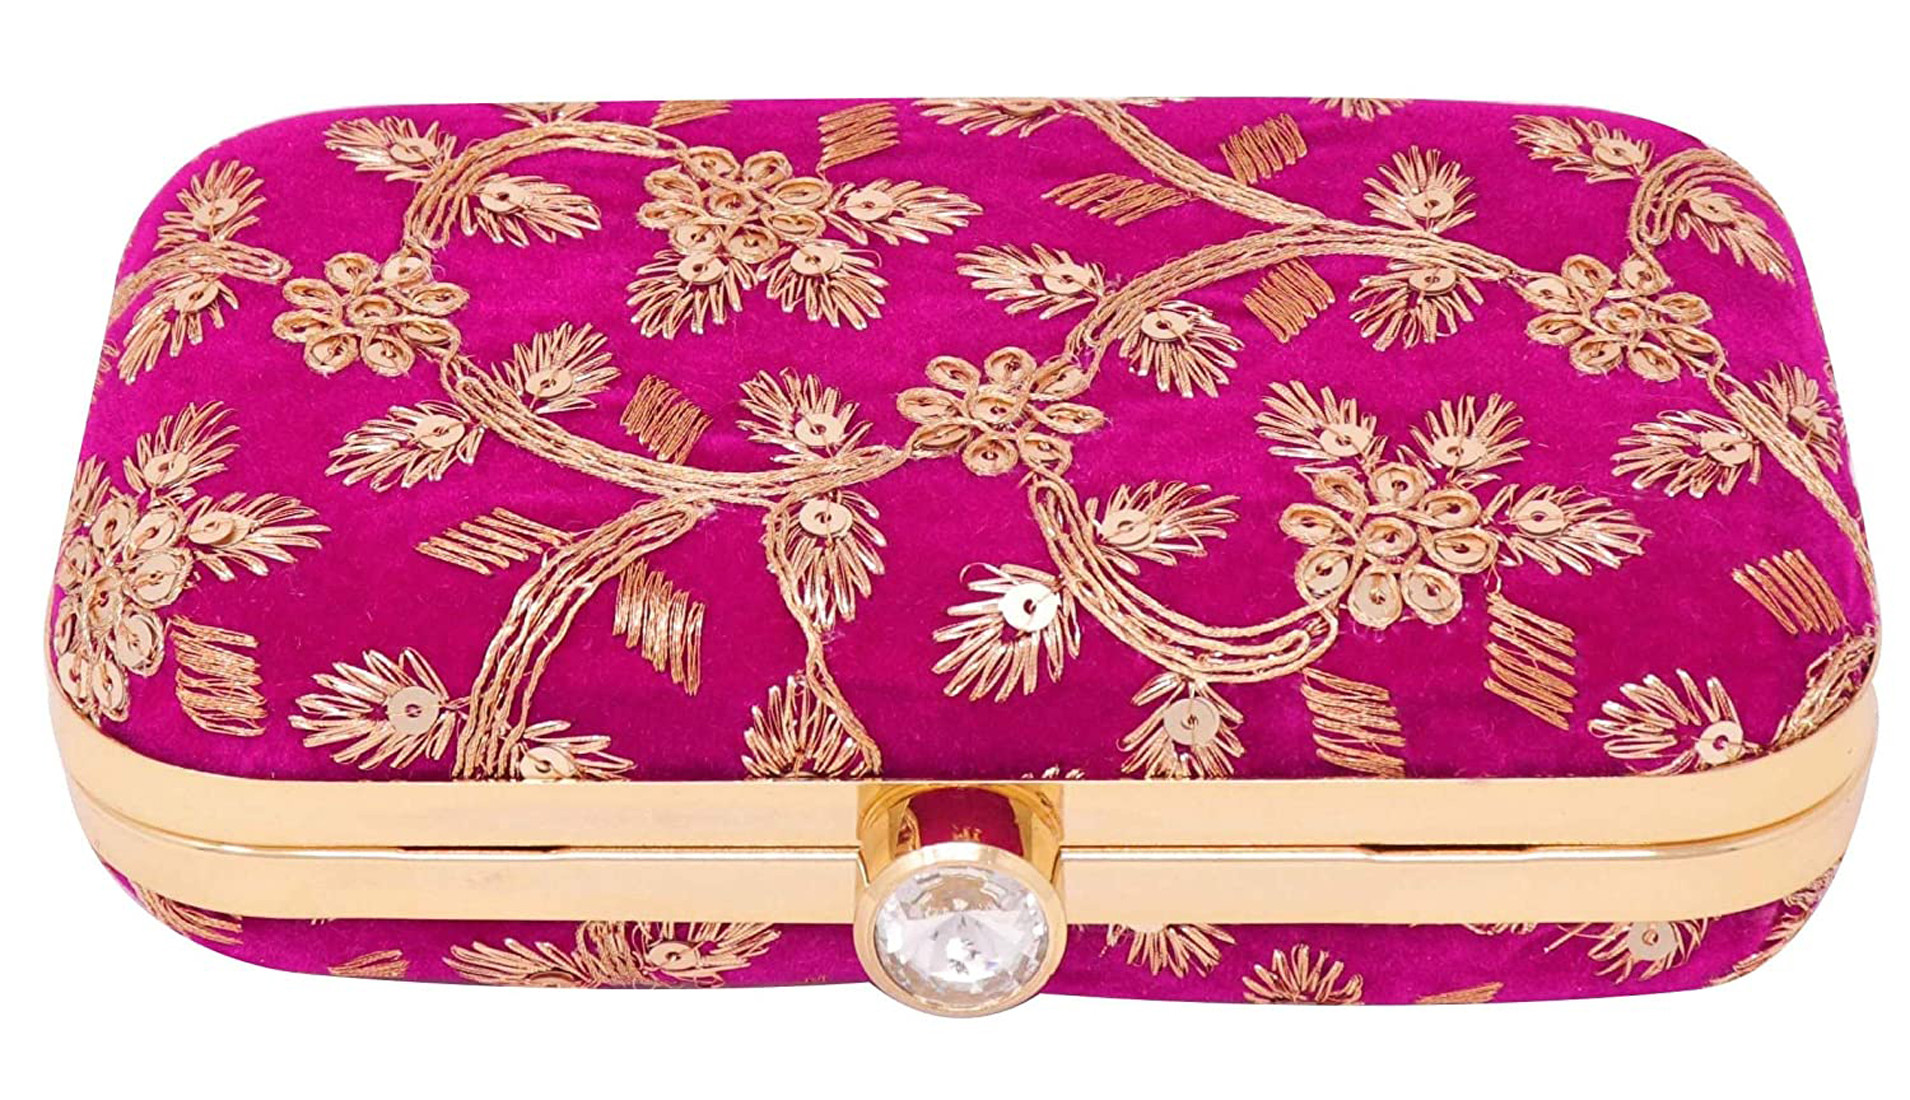 Kuber Industries Party Wear Clutch Bag Purse Handbag For Bridal, Casual, Party, Wedding (Pink)-KUBMRT11860